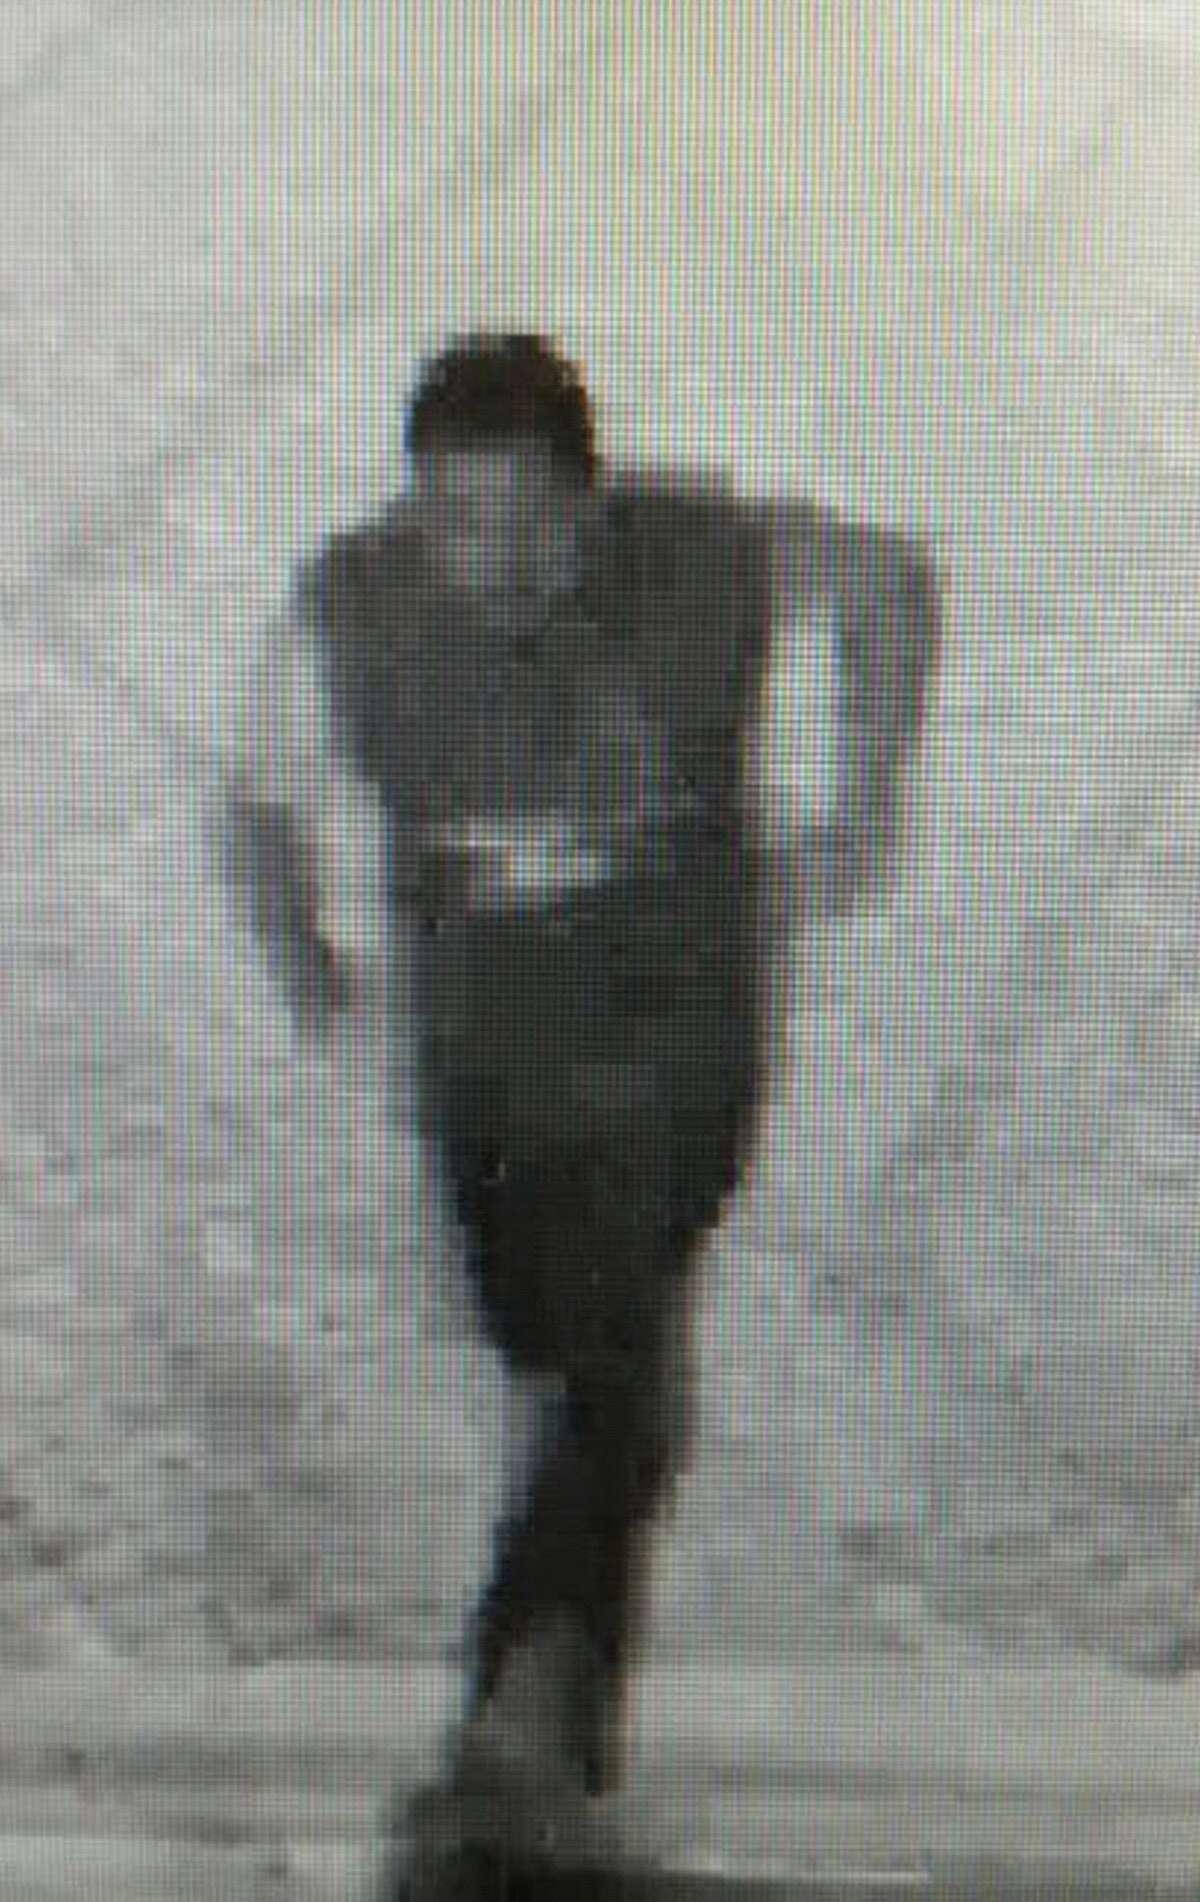 Laredo police are asking for the public's help in identifying the man pictured. They said he is a person of interest in the slaying of a 16-year-old girl, whose body was found Thursday near the walking trails behind the Haynes Recreation Center